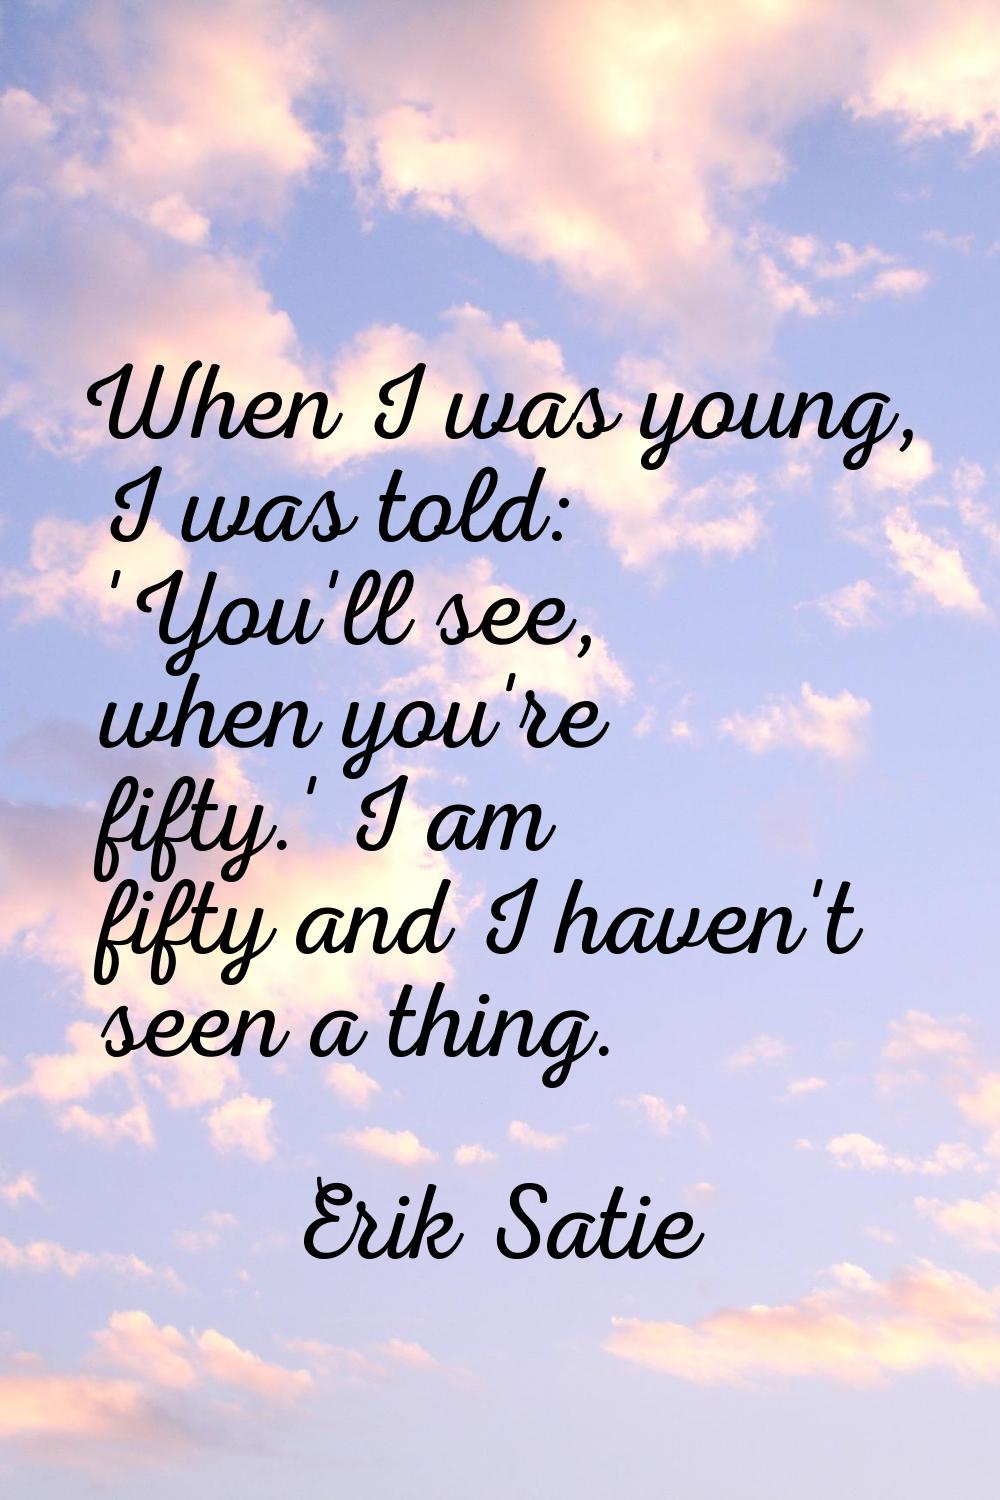 When I was young, I was told: 'You'll see, when you're fifty.' I am fifty and I haven't seen a thin